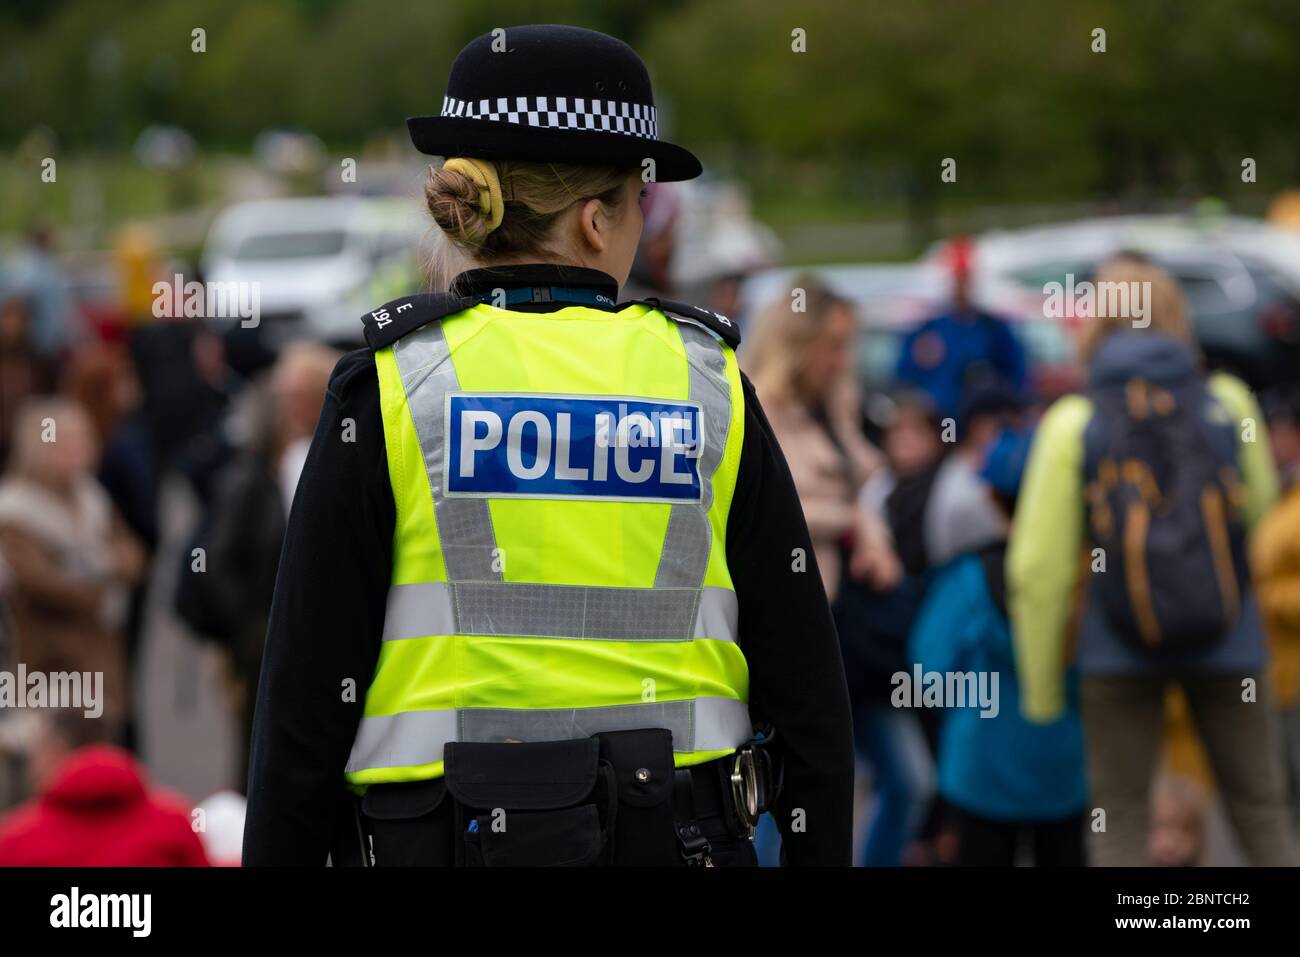 Edinburgh, Scotland, UK. Police watching over a small group of people in Holyrood Park. Possible that one or two members of the public were part of an anti-lockdown protest in the park that was promoted on Facebook this week. No large scale protest is visible in the park at the planned start time however. Iain Masterton/Alamy Live News Stock Photo